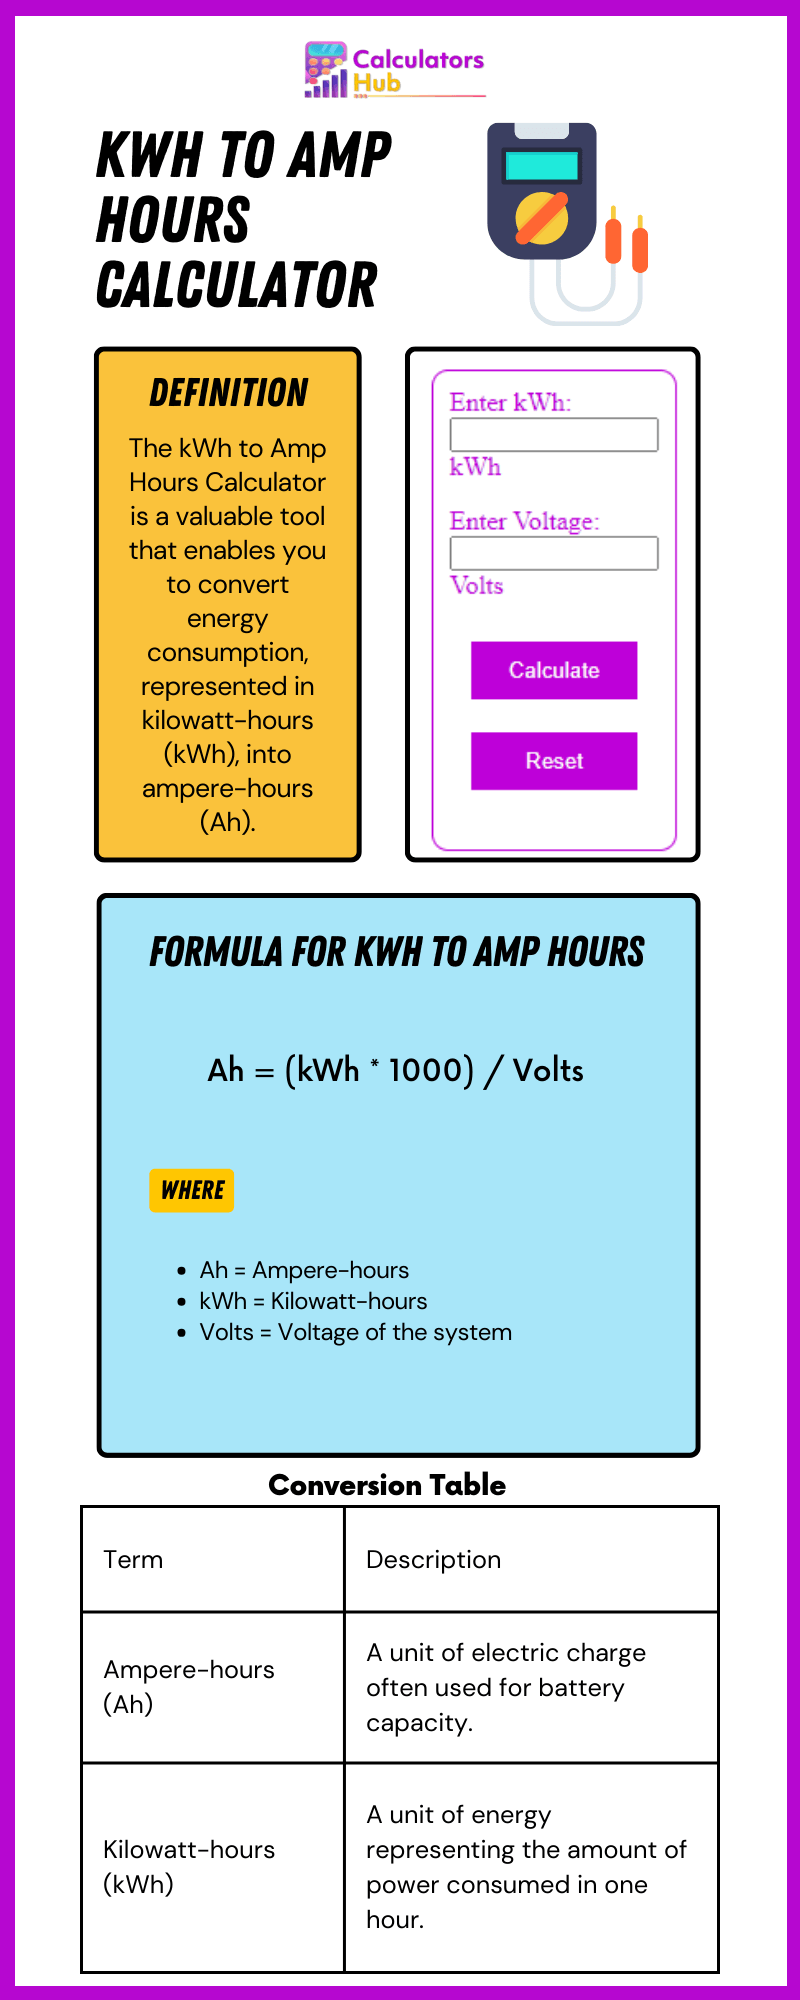 kWh to Amp Hours Calculator